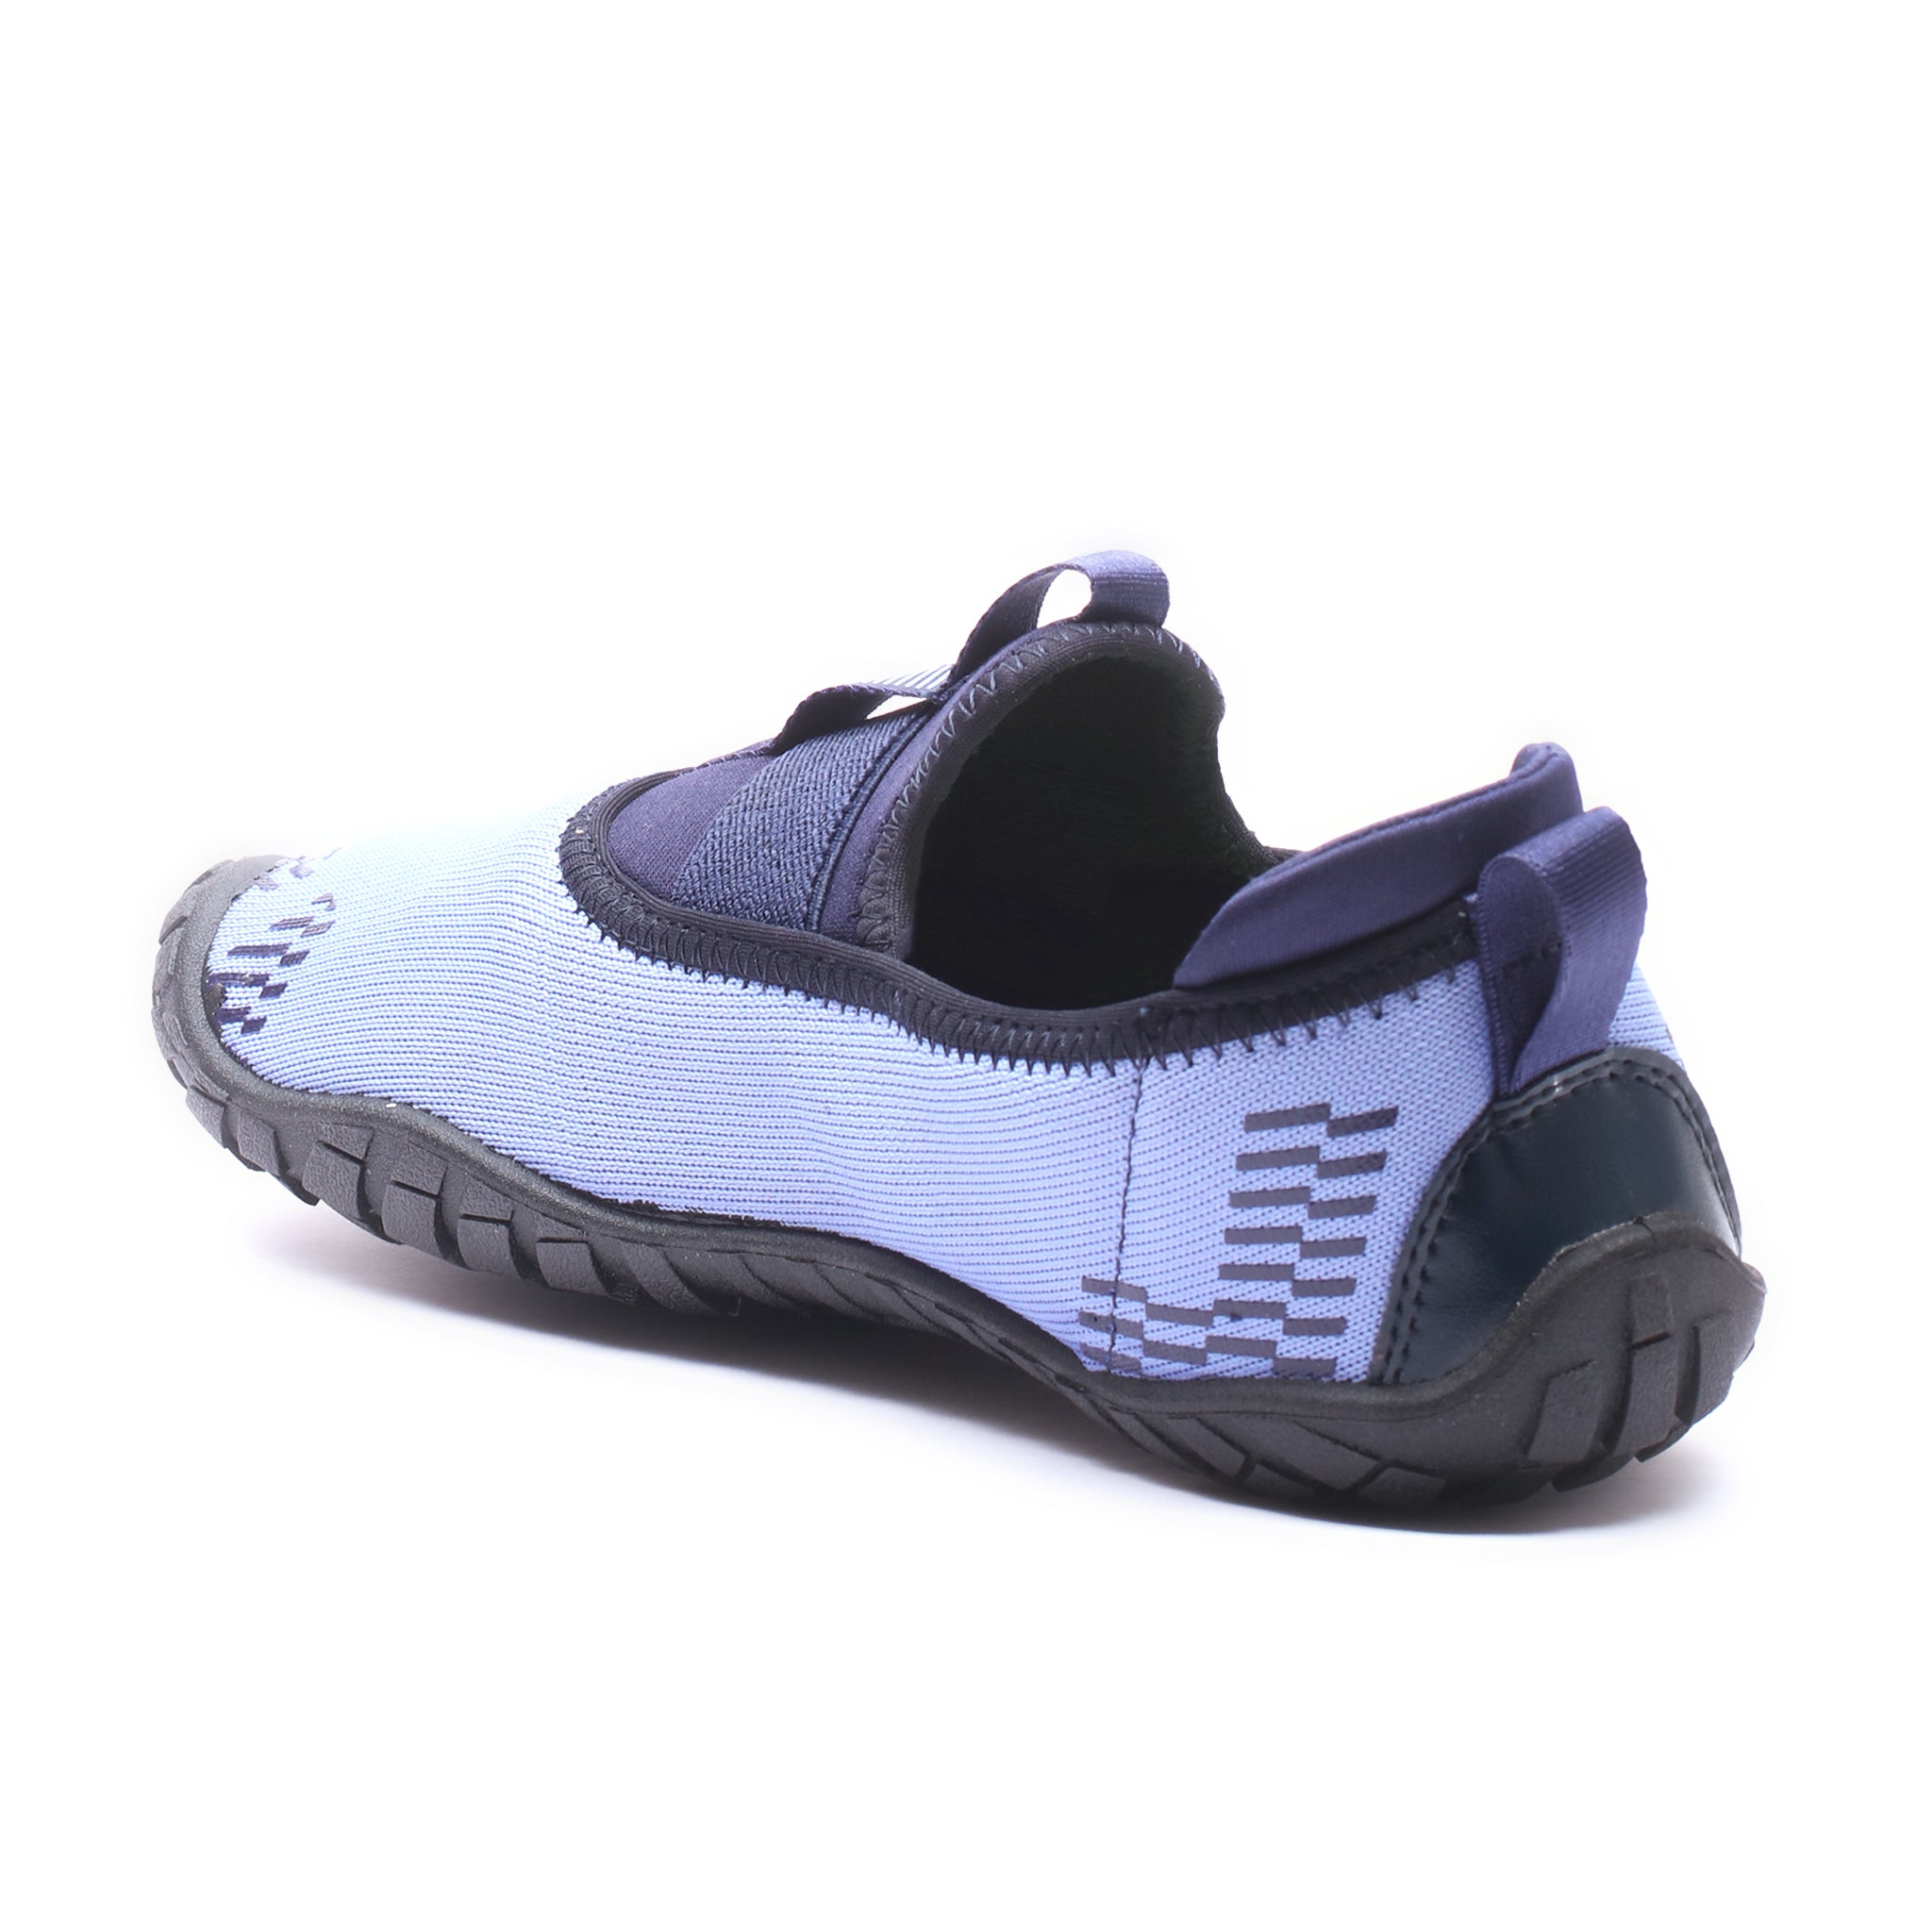 Impakto  Barefoot Rooted  Men's  Blue Gym Shoes